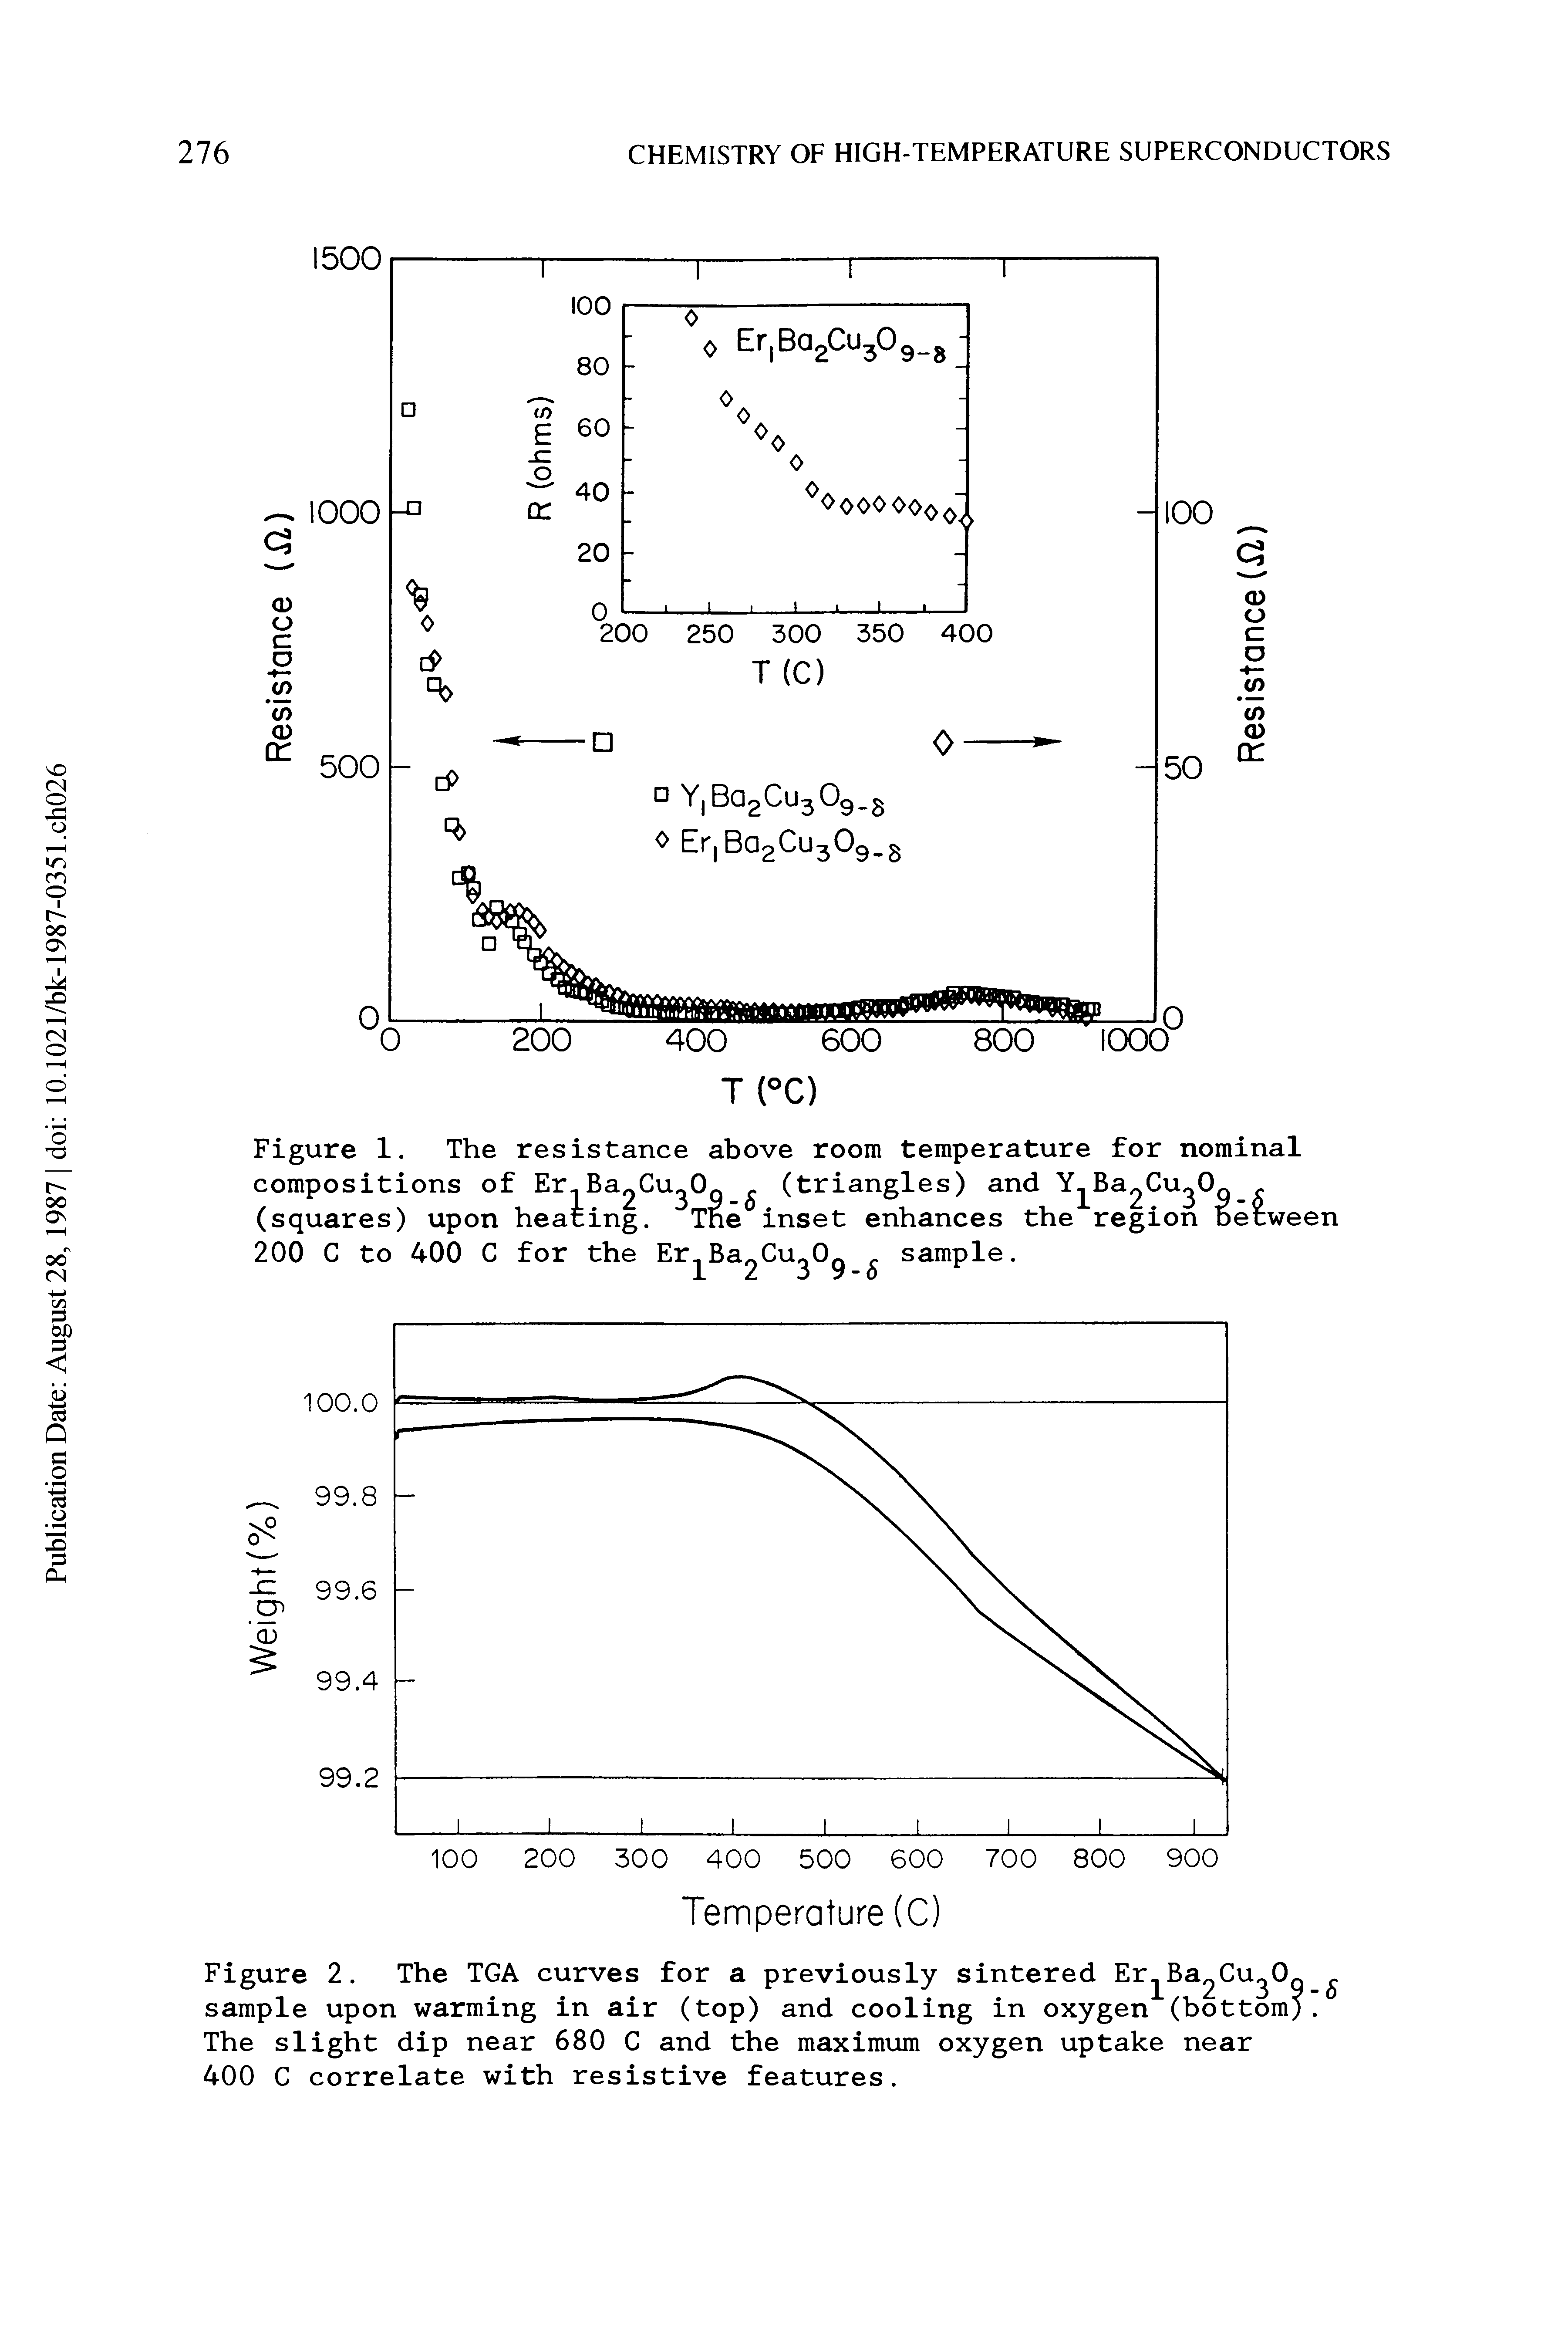 Figure 1. The resistance above room temperature for nominal compositions of Er-Ba Cu OQ (triangles) and Y Ba Cu OQ (squares) upon heating. The inset enhances the region between 200 C to 400 C for the Er BaoCuo0Q. sample.